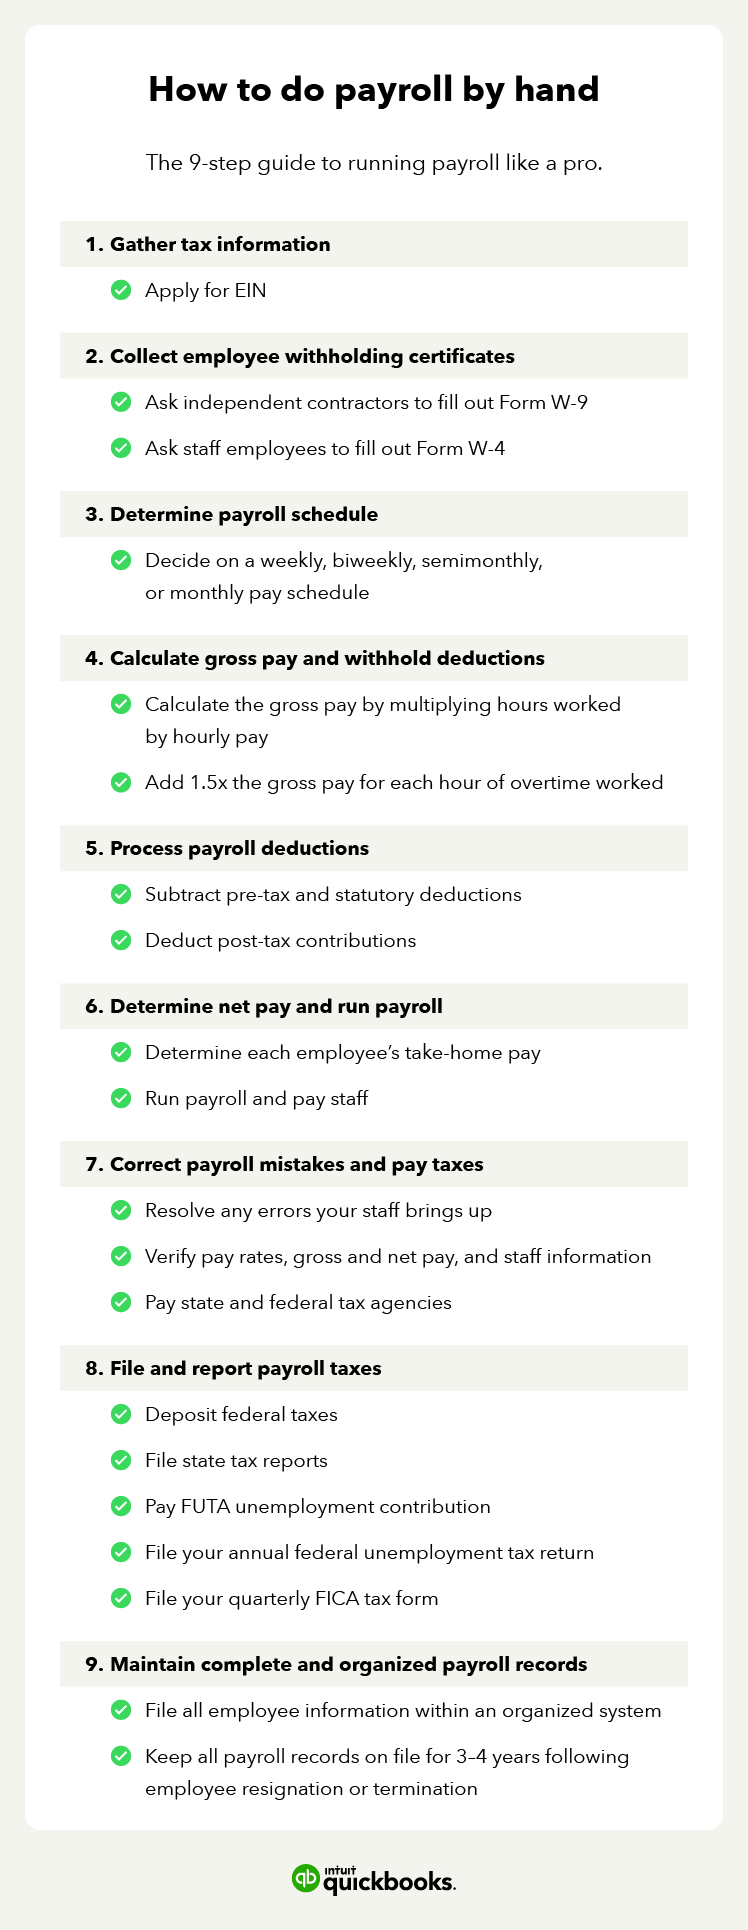 Checklist with steps showing how to do payroll manually.